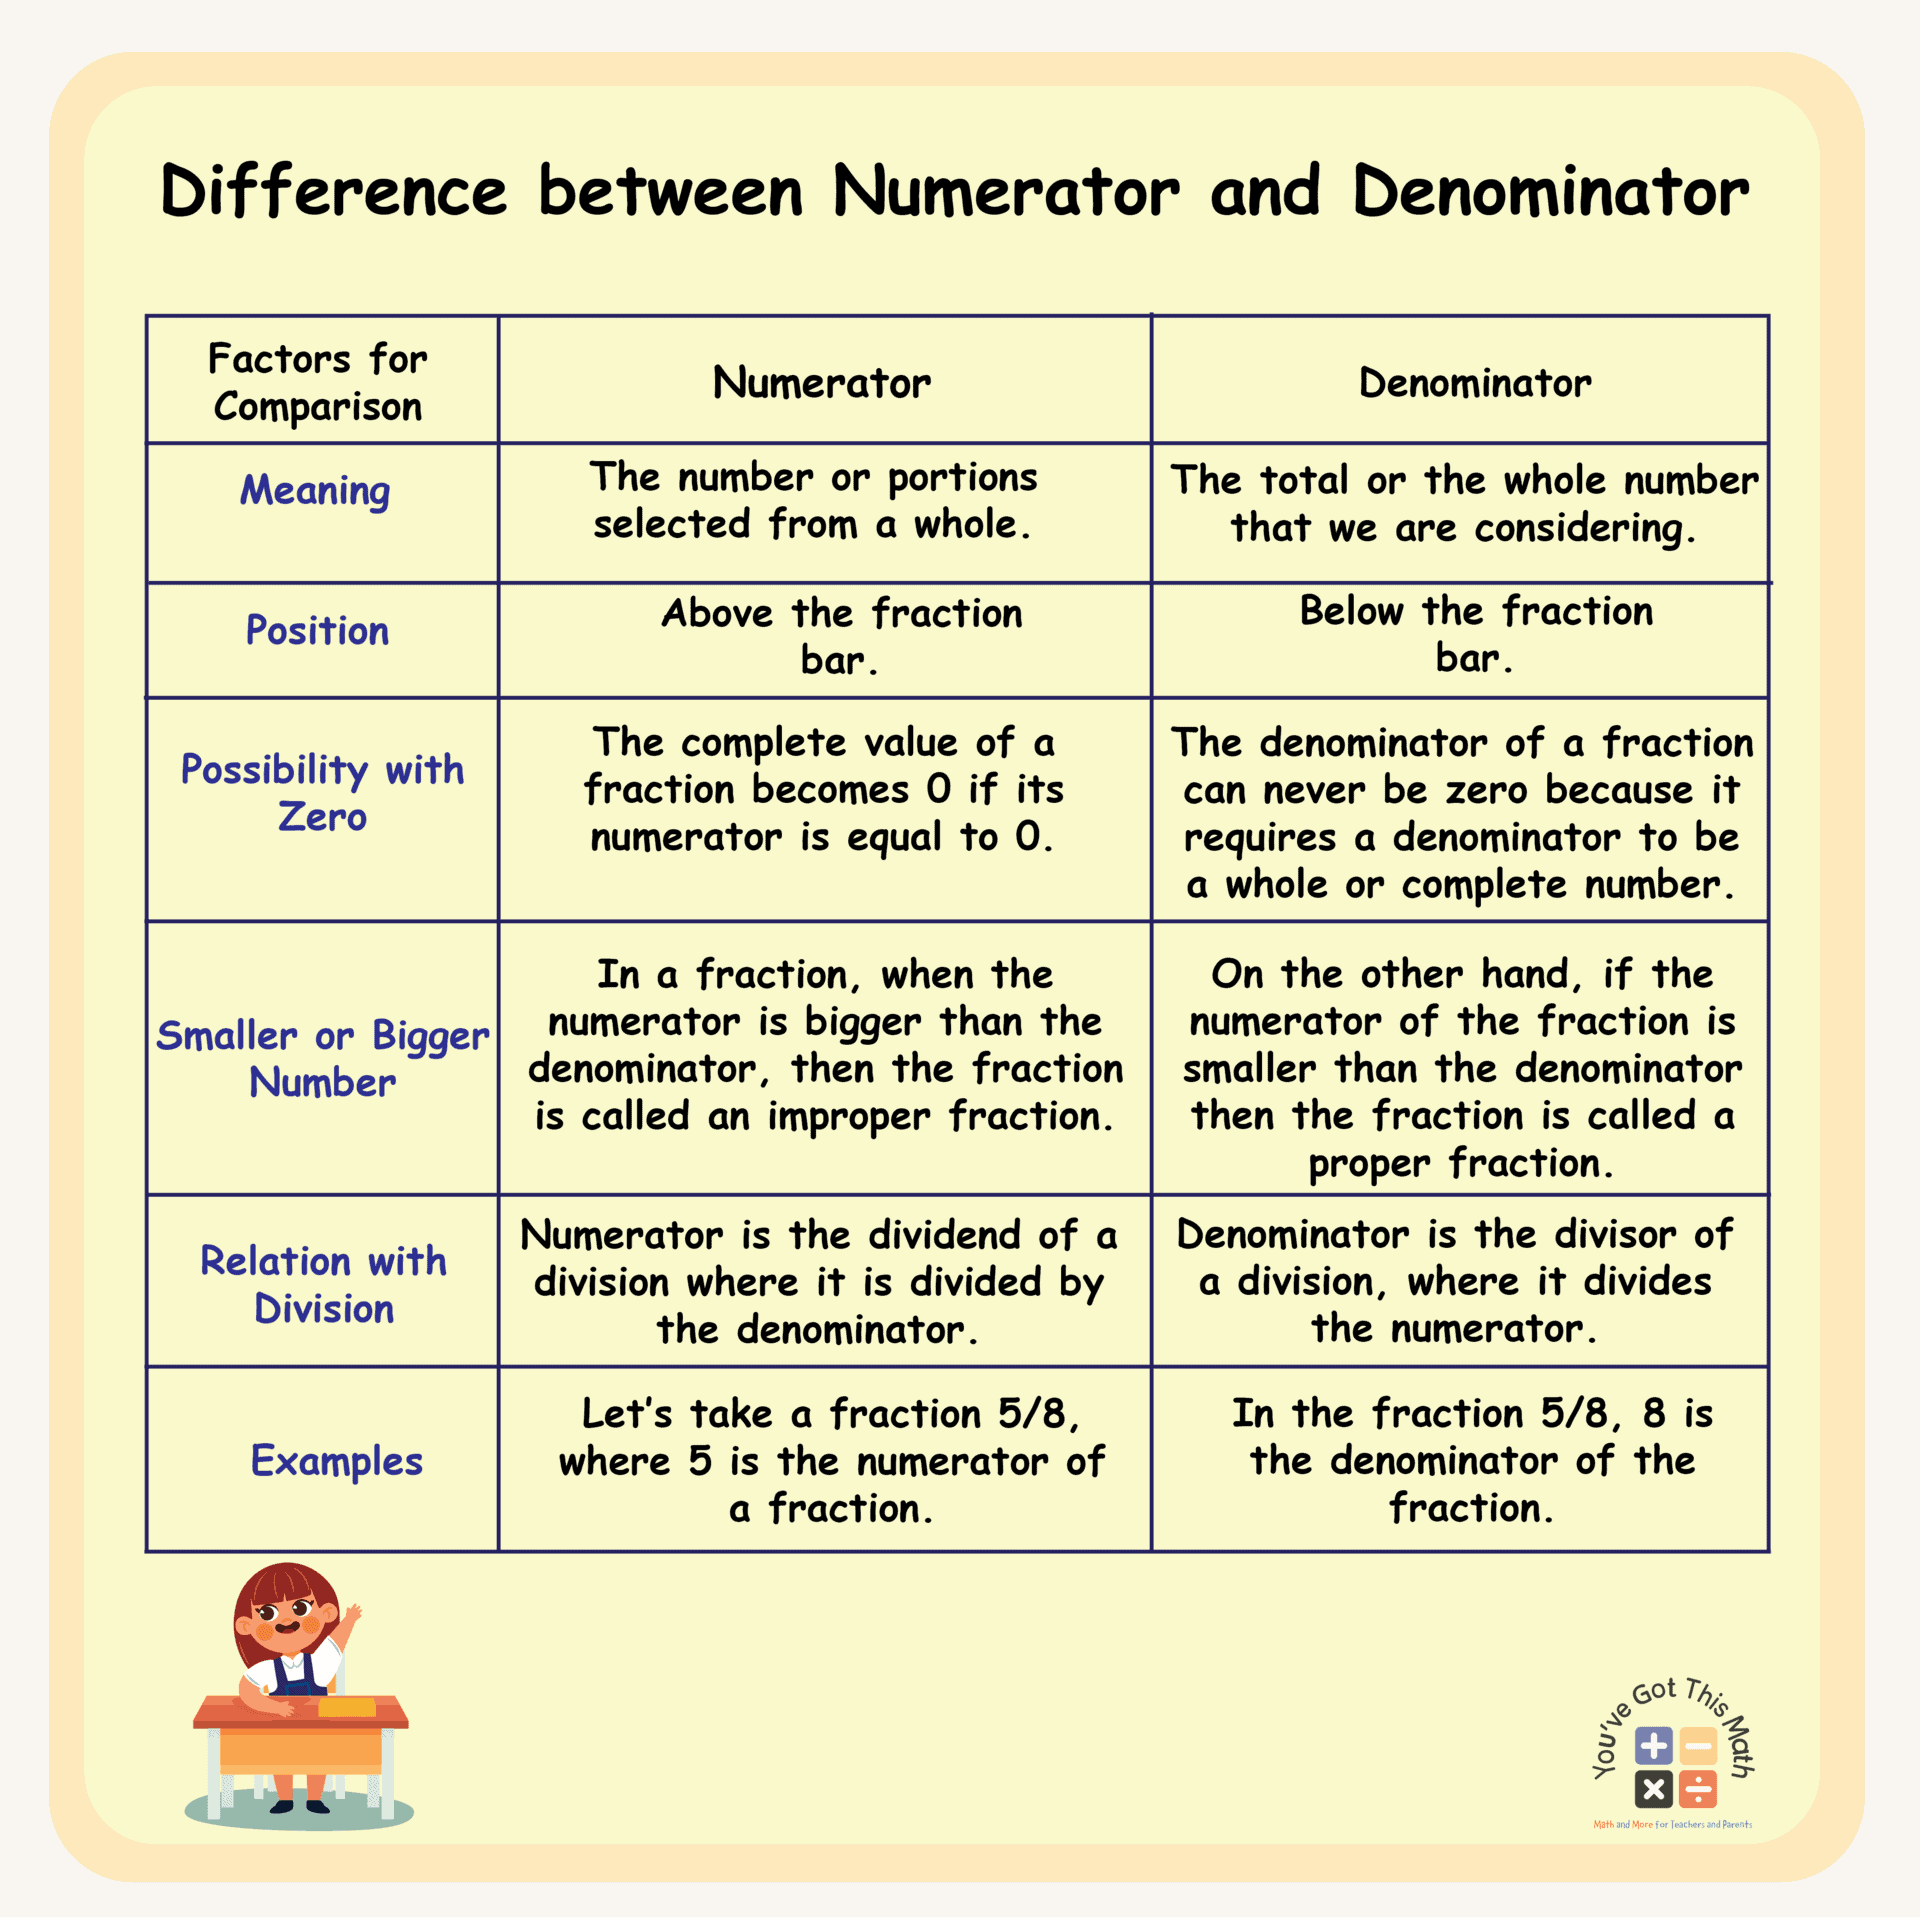 Showing Difference between Numerator and Denominator